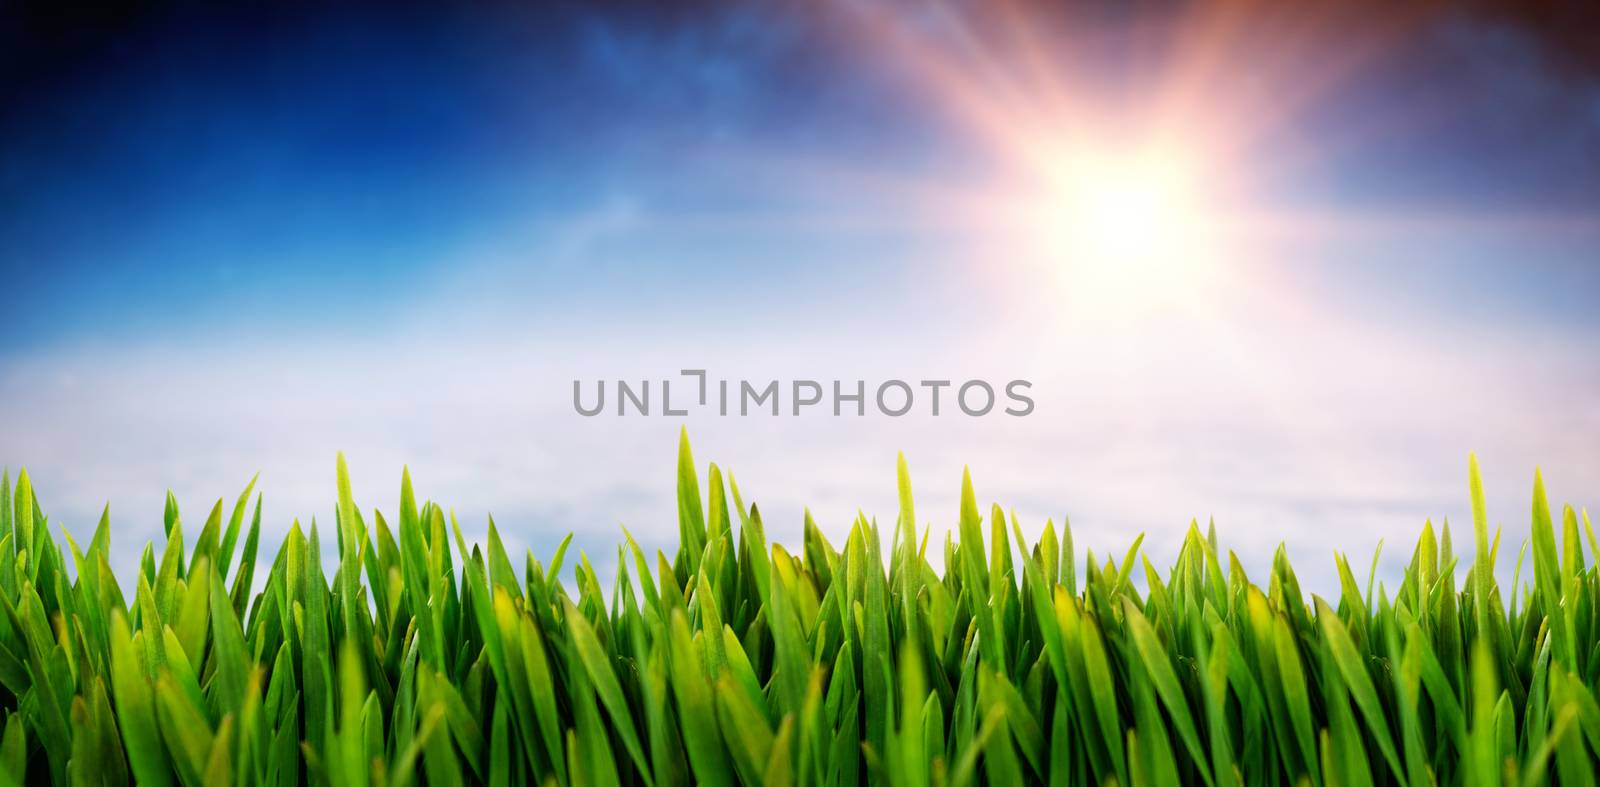 Grass growing outdoors against white clouds under blue sky